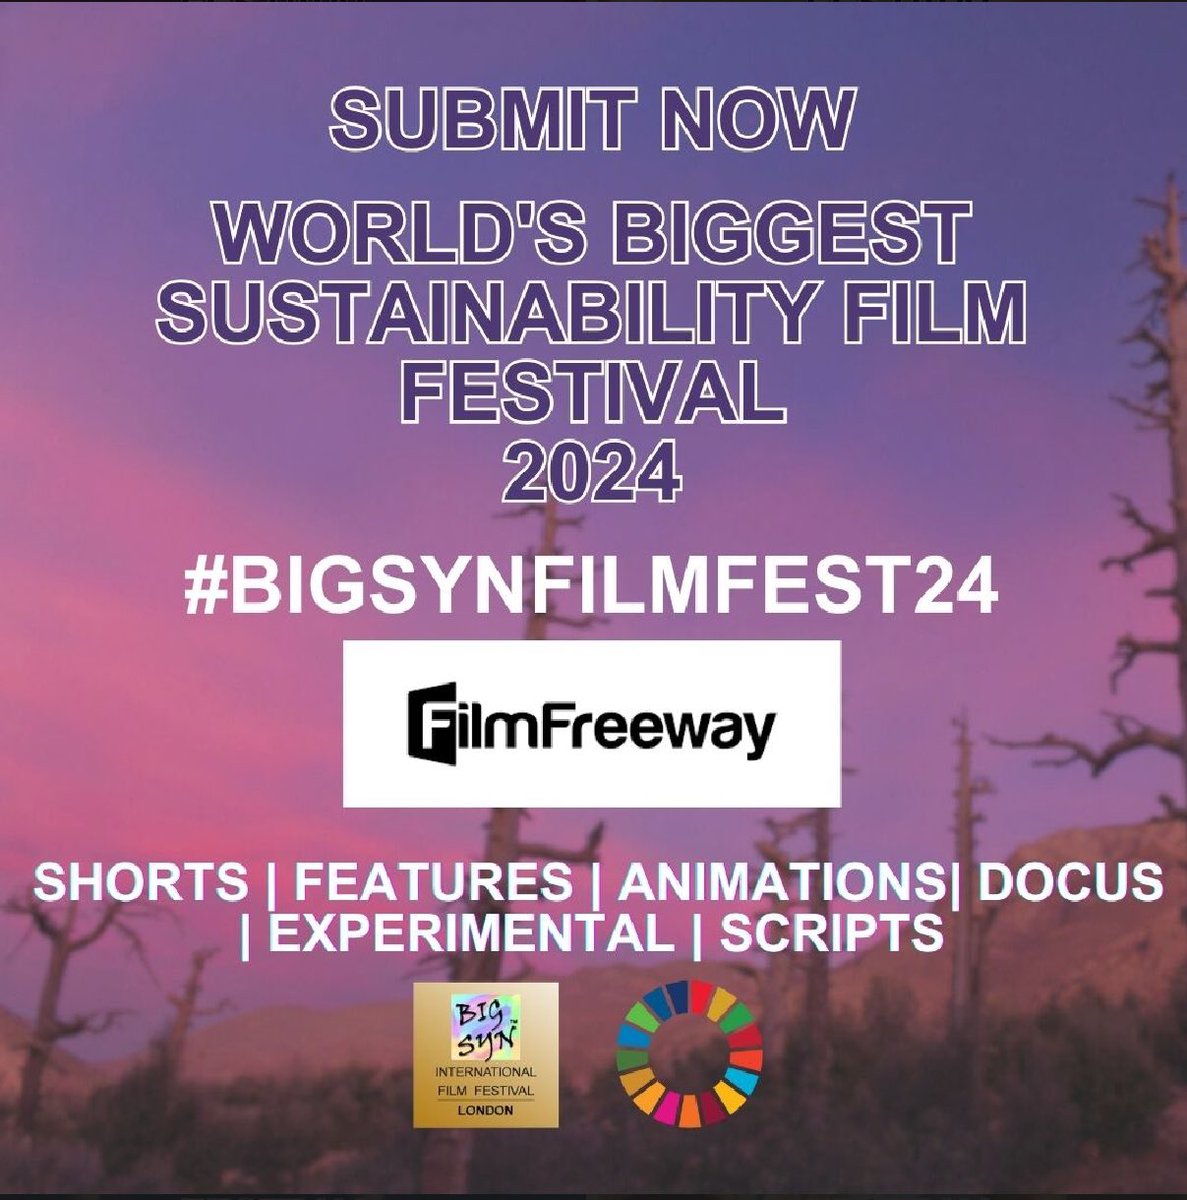 #bigsynfilmfest24 is the world’s biggest Sustainability Film Festival, led by OSCAR, BAFTA and EMMY winners. The festival has reached over 45million people in 120 countries. What are you waiting for? Submit your film today via @FilmFreeway Proud to be a @LondonBigSynFF ambassador